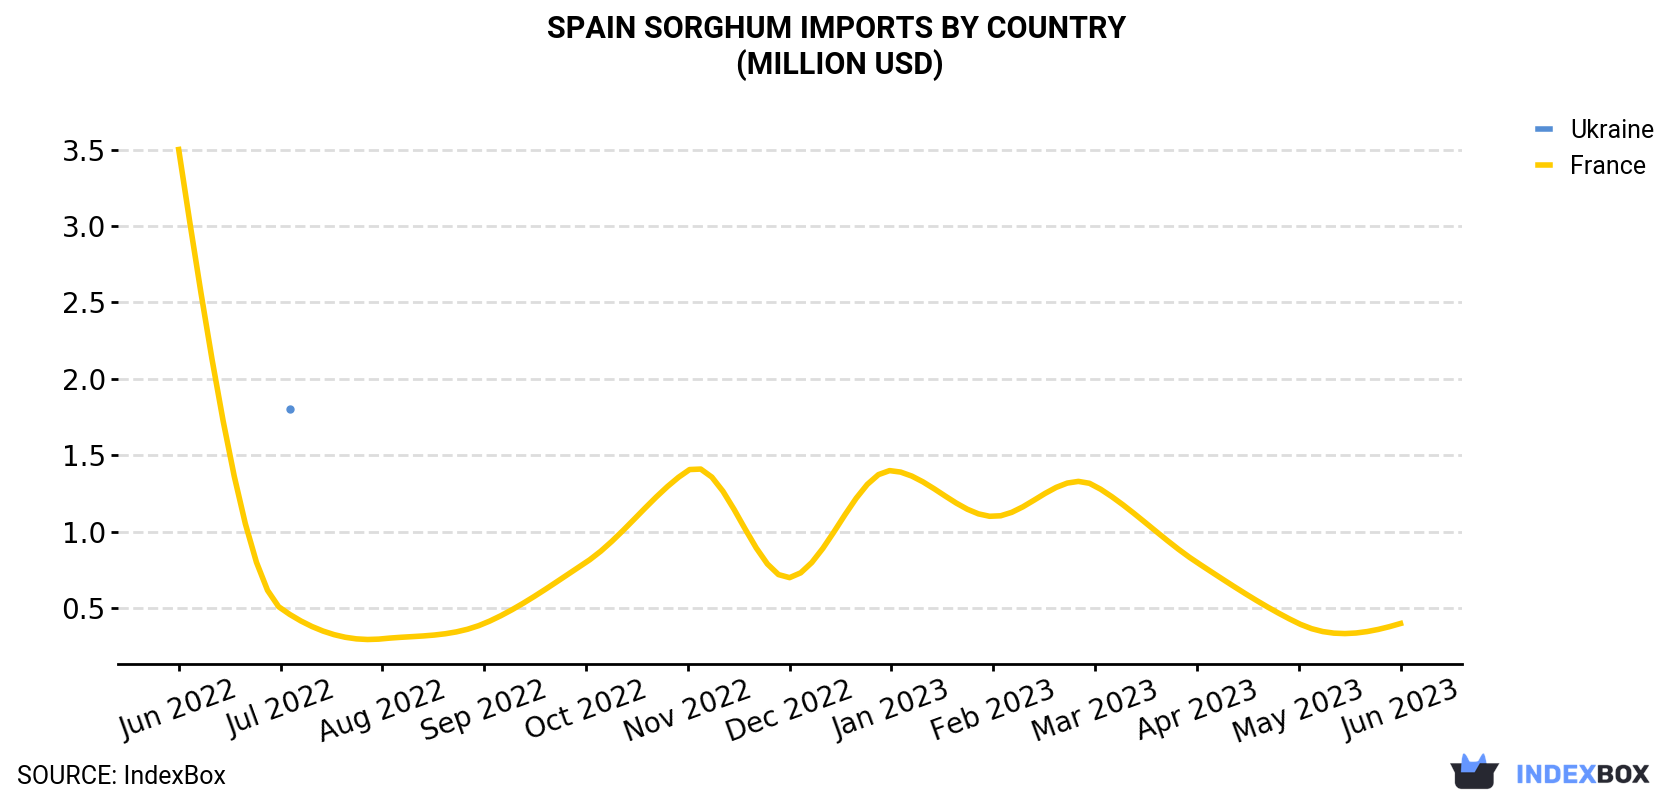 Spain Sorghum Imports By Country (Million USD)